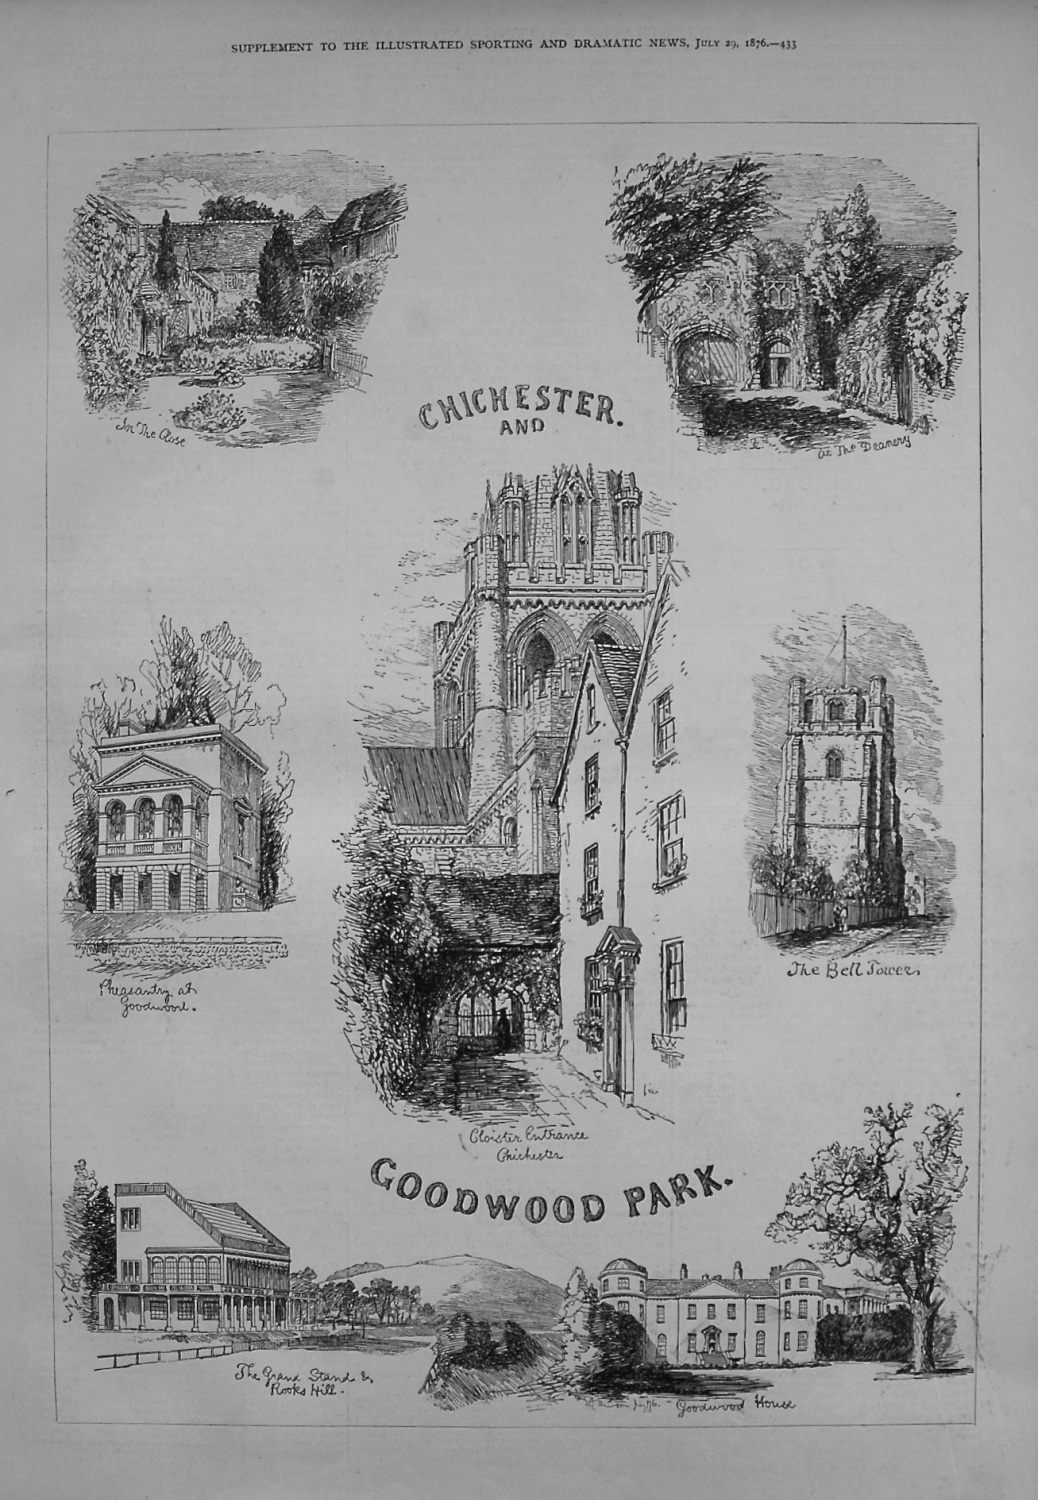 Chichester and Goodwood Park. 1876